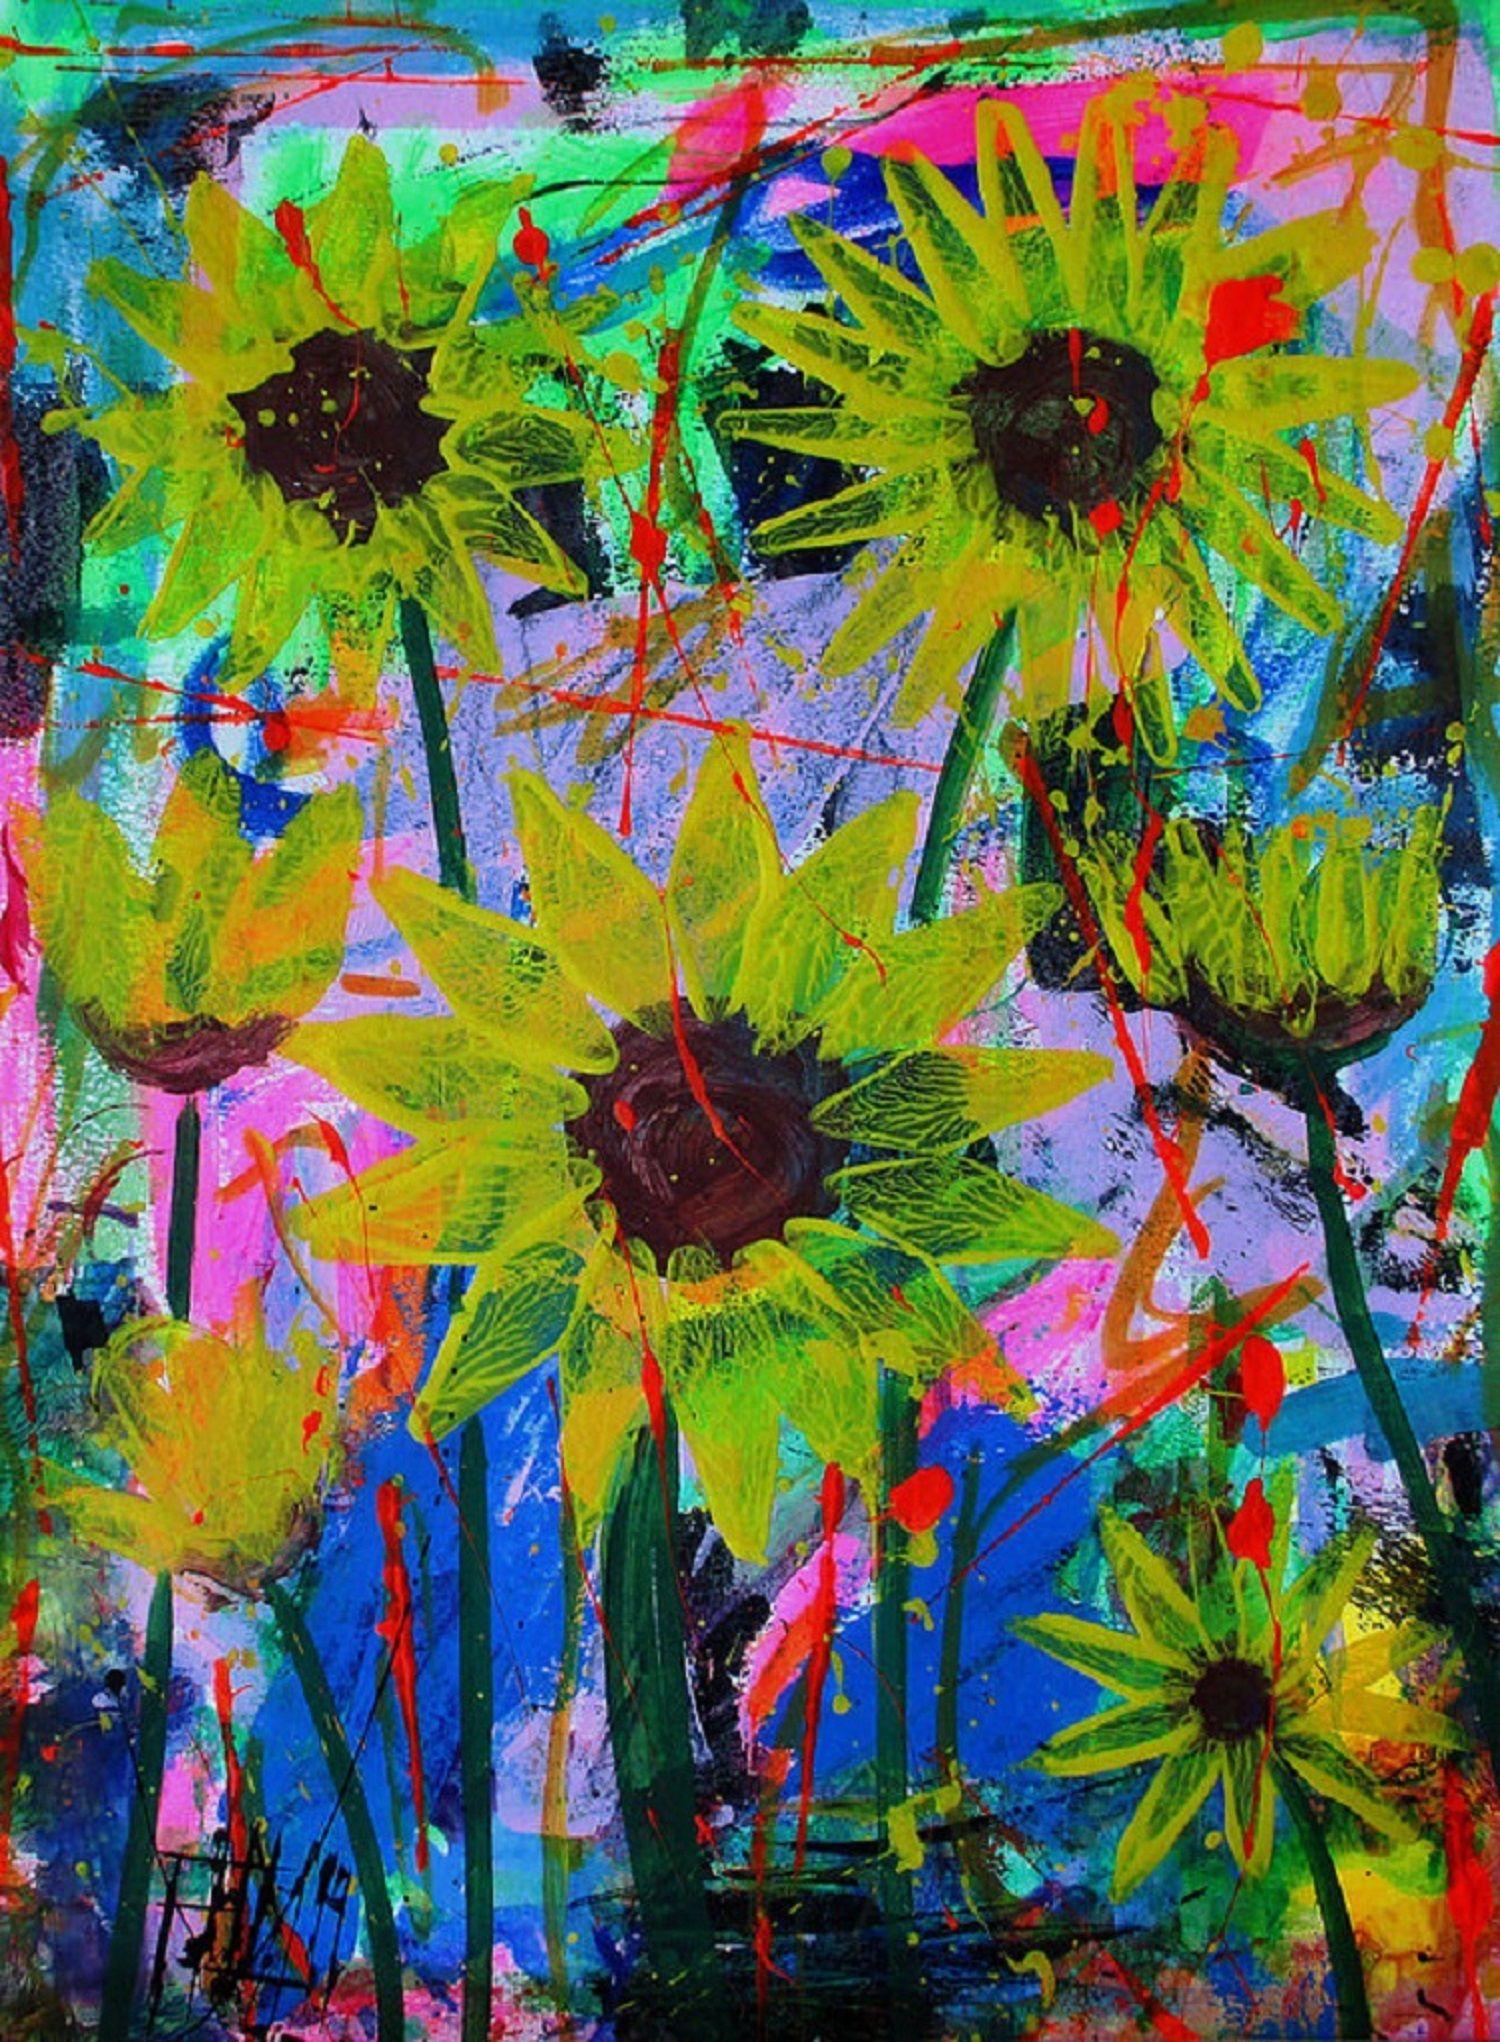 Part of the "Floret" series. Growing up in New York City, I was exposed to the urban colors and imagery of the city. My surroundings and a fascination with the abstract expressionism movement played a major role in me becoming an artist. I approach